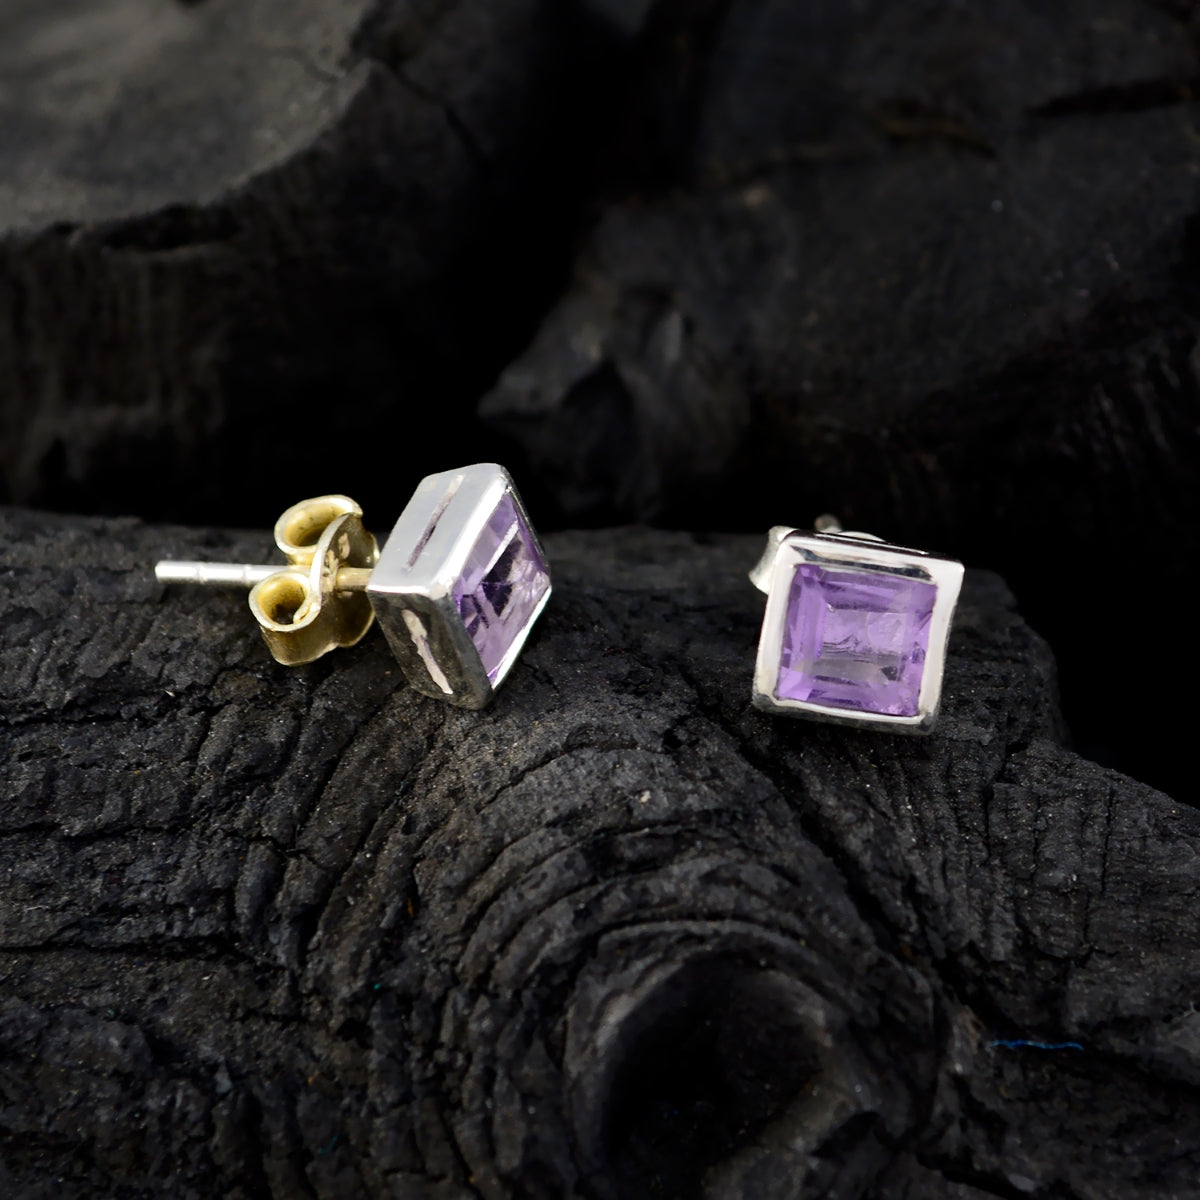 Riyo Nice Gemstone square Faceted Purple Amethyst Silver Earring gift for graduation